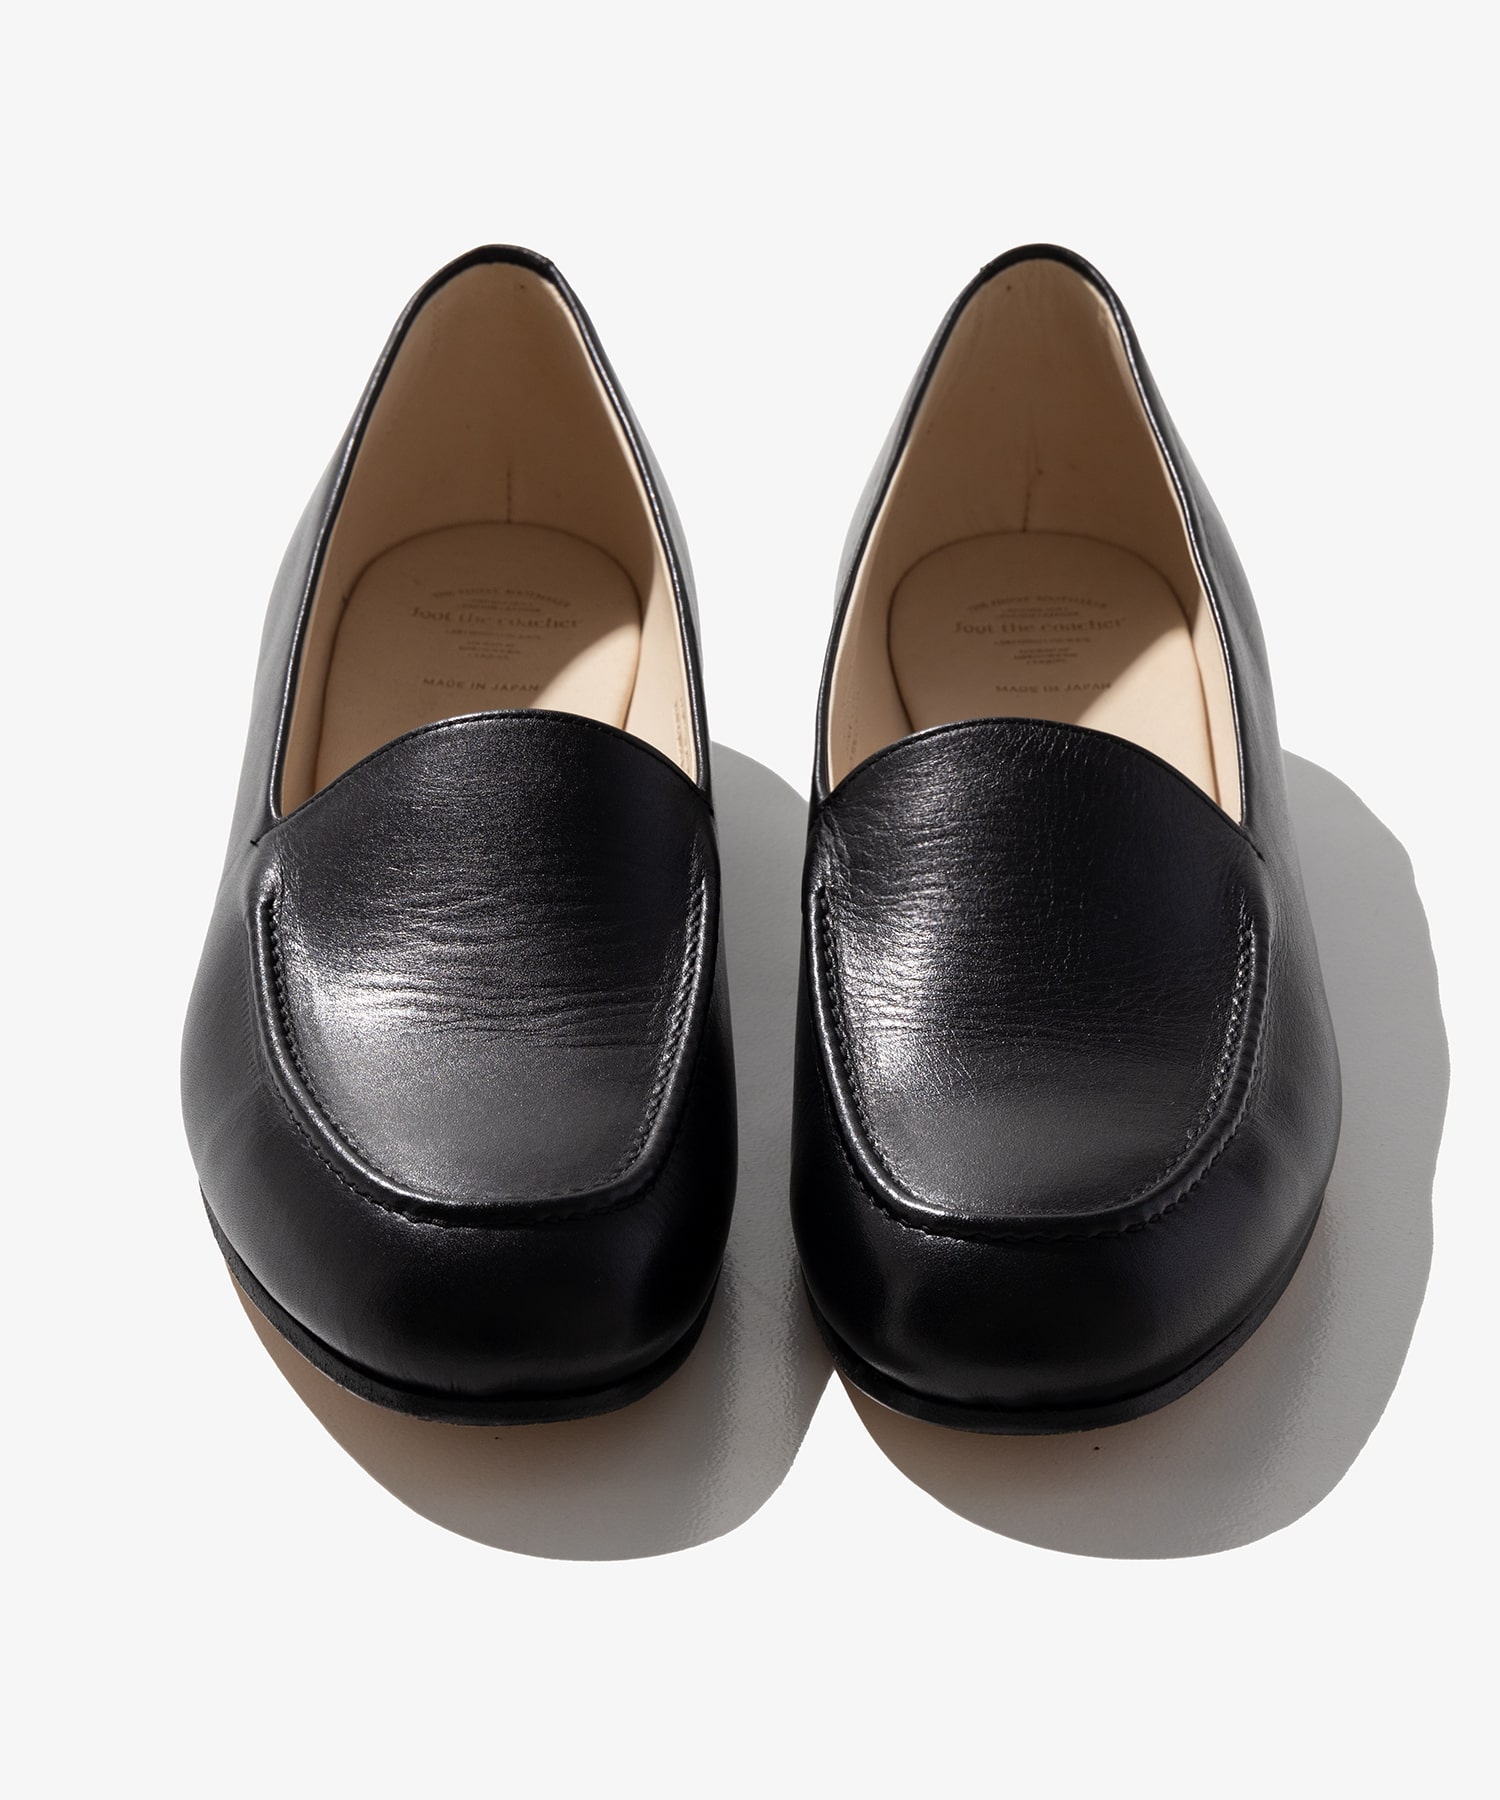 MINIMAL LOAFER | foot the coacher